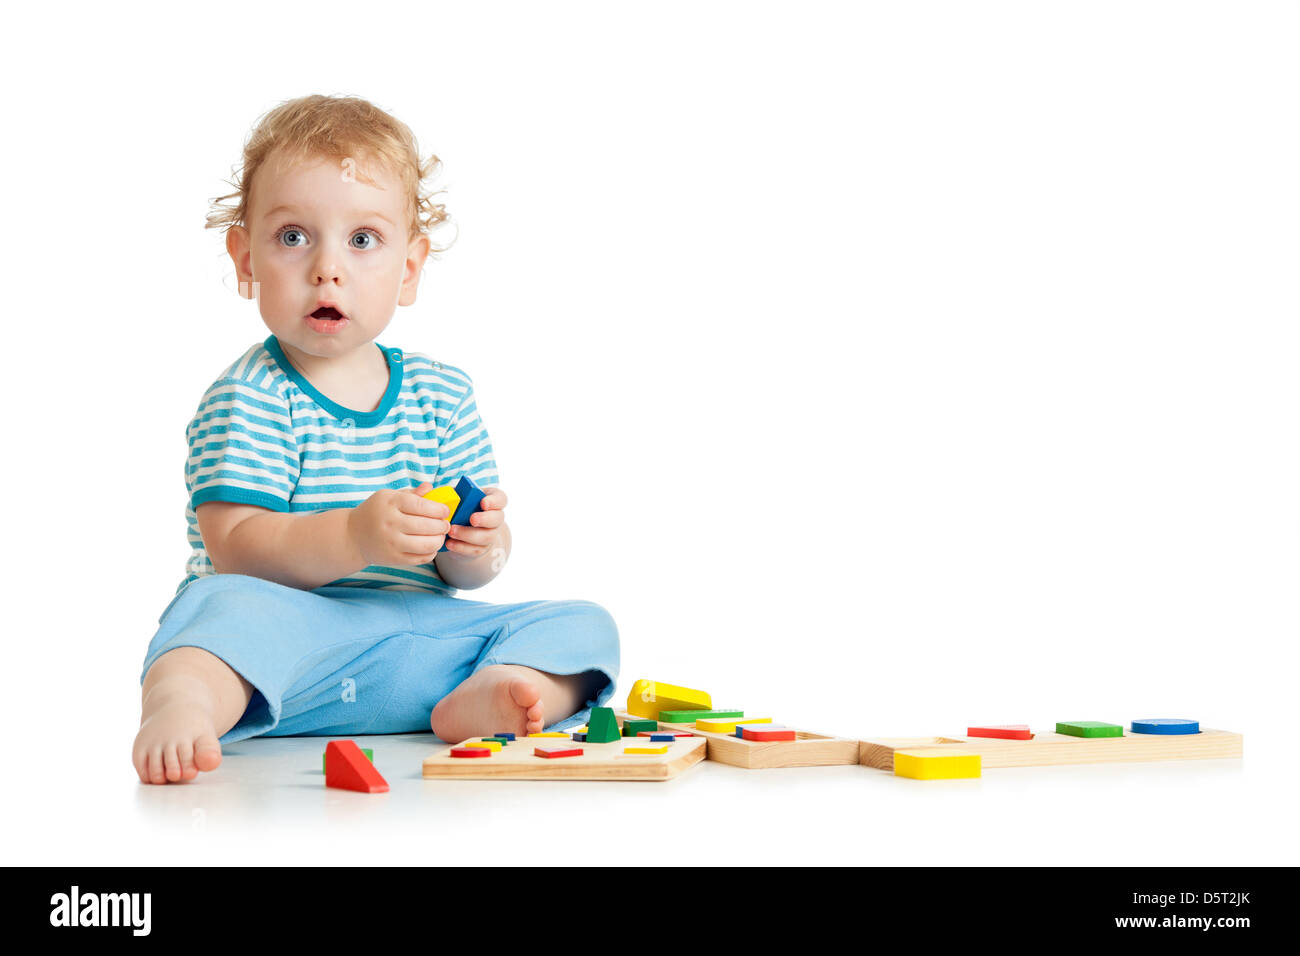 happy kid playing toys Stock Photo